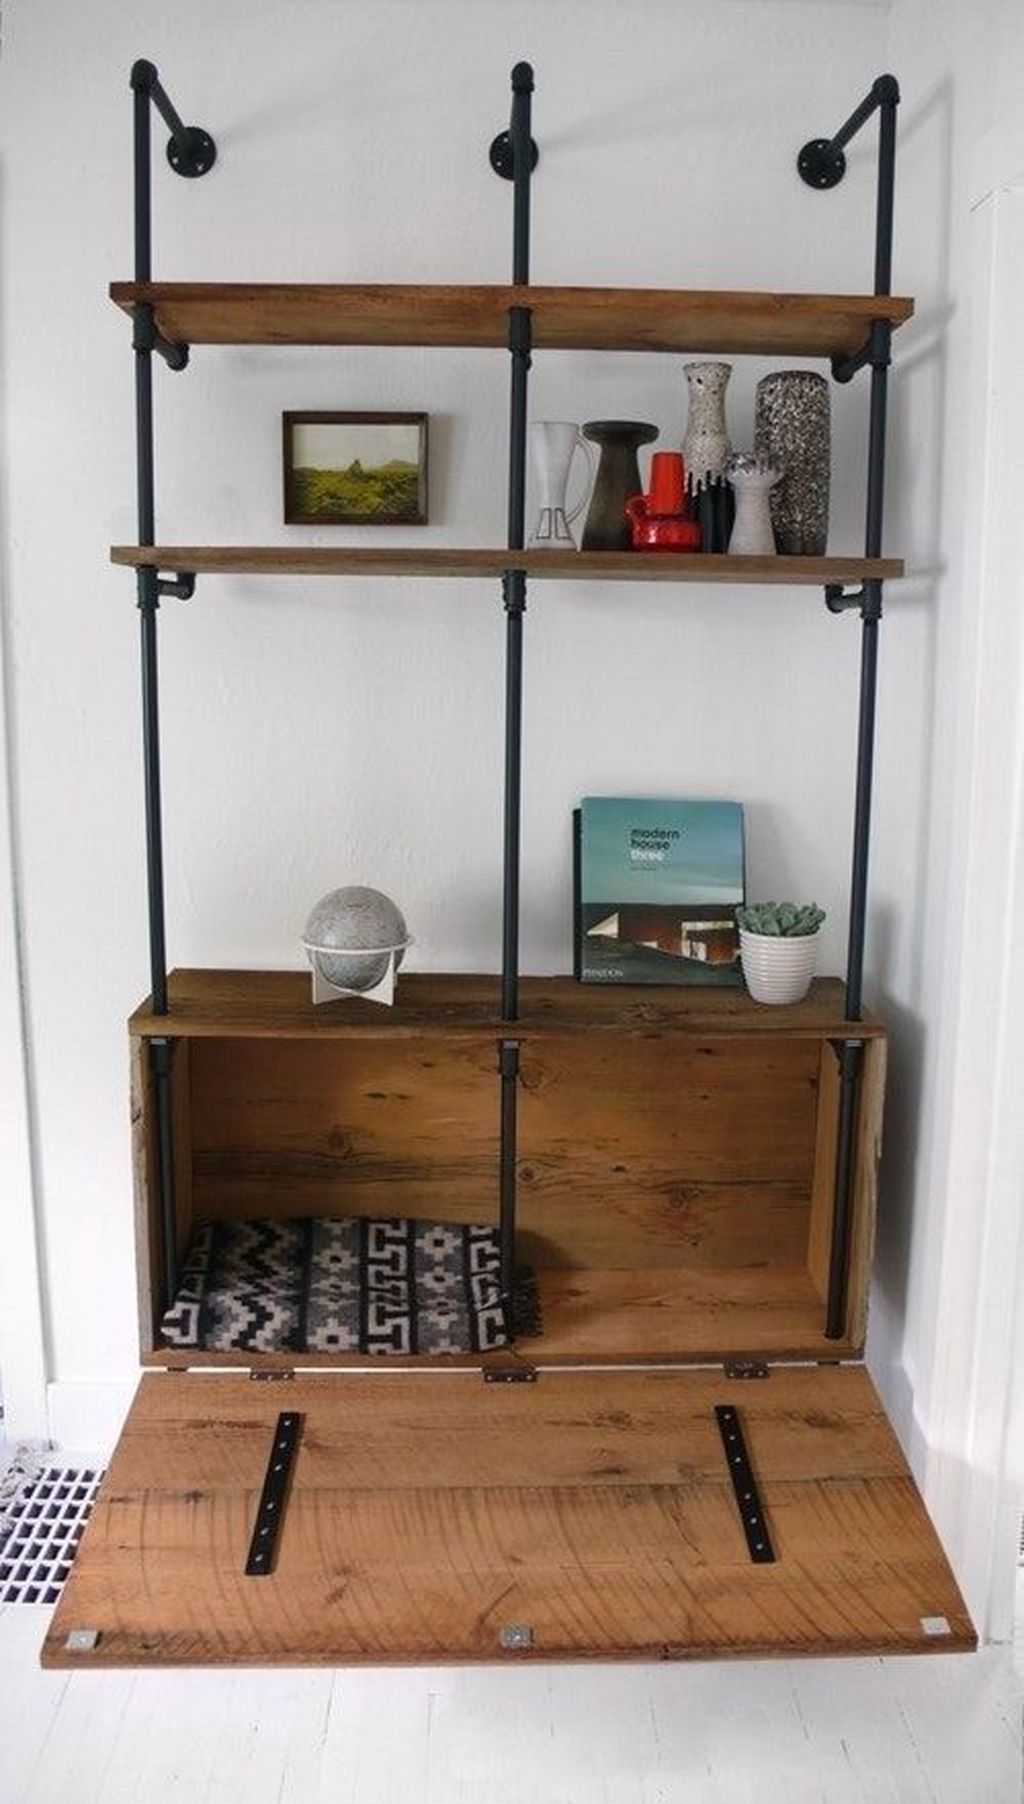 44 Awesome Diy Industrial Pipe Shelves Ideas To Try Right Now - 44 Awesome Diy Industrial Pipe Shelves Ideas To Try Right Now -   14 diy Shelves desk ideas